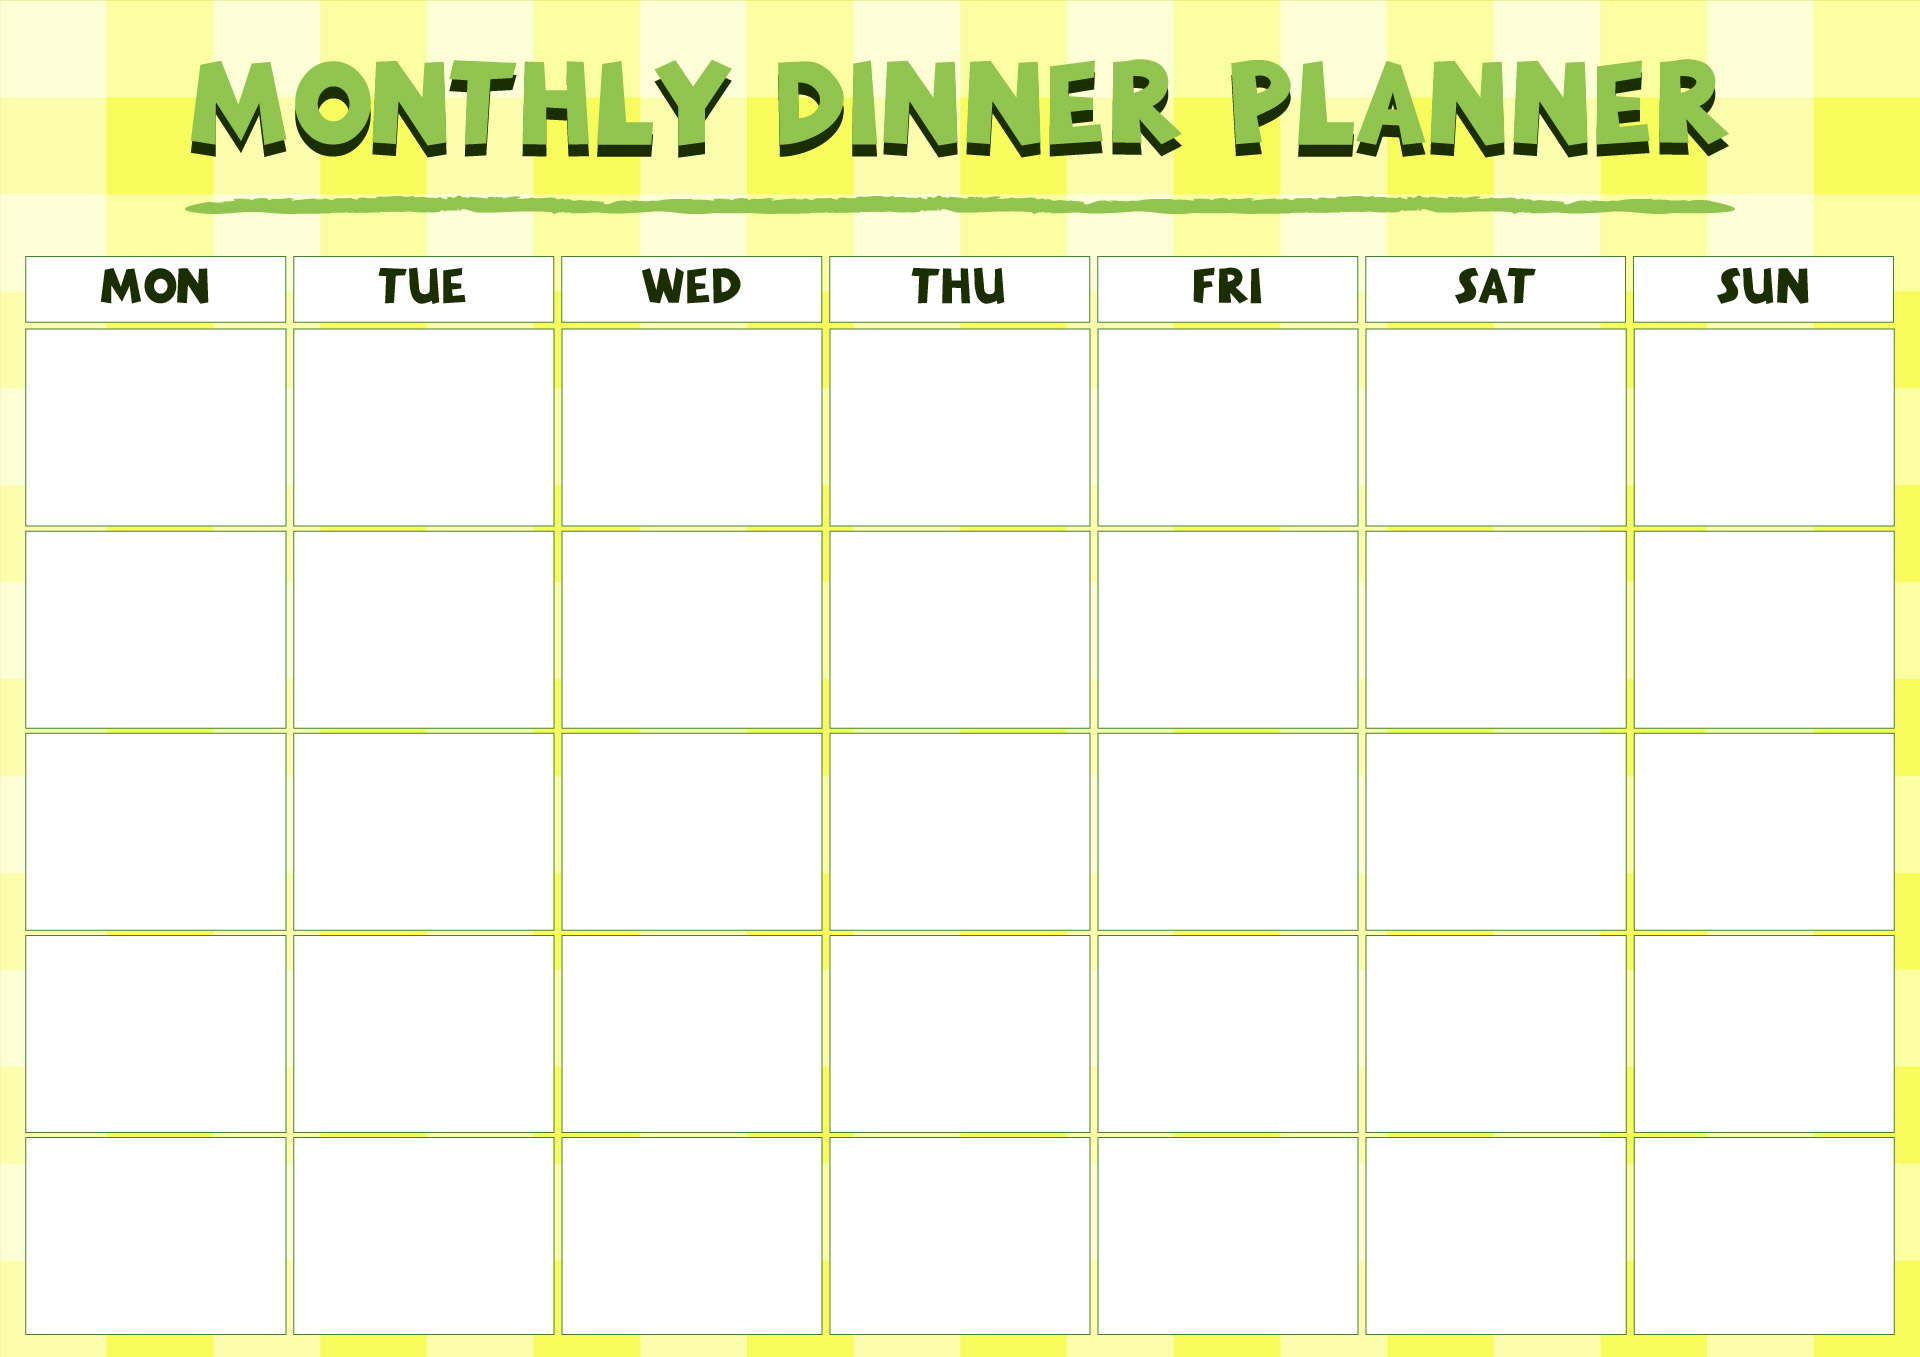 printable monthly meal planner template